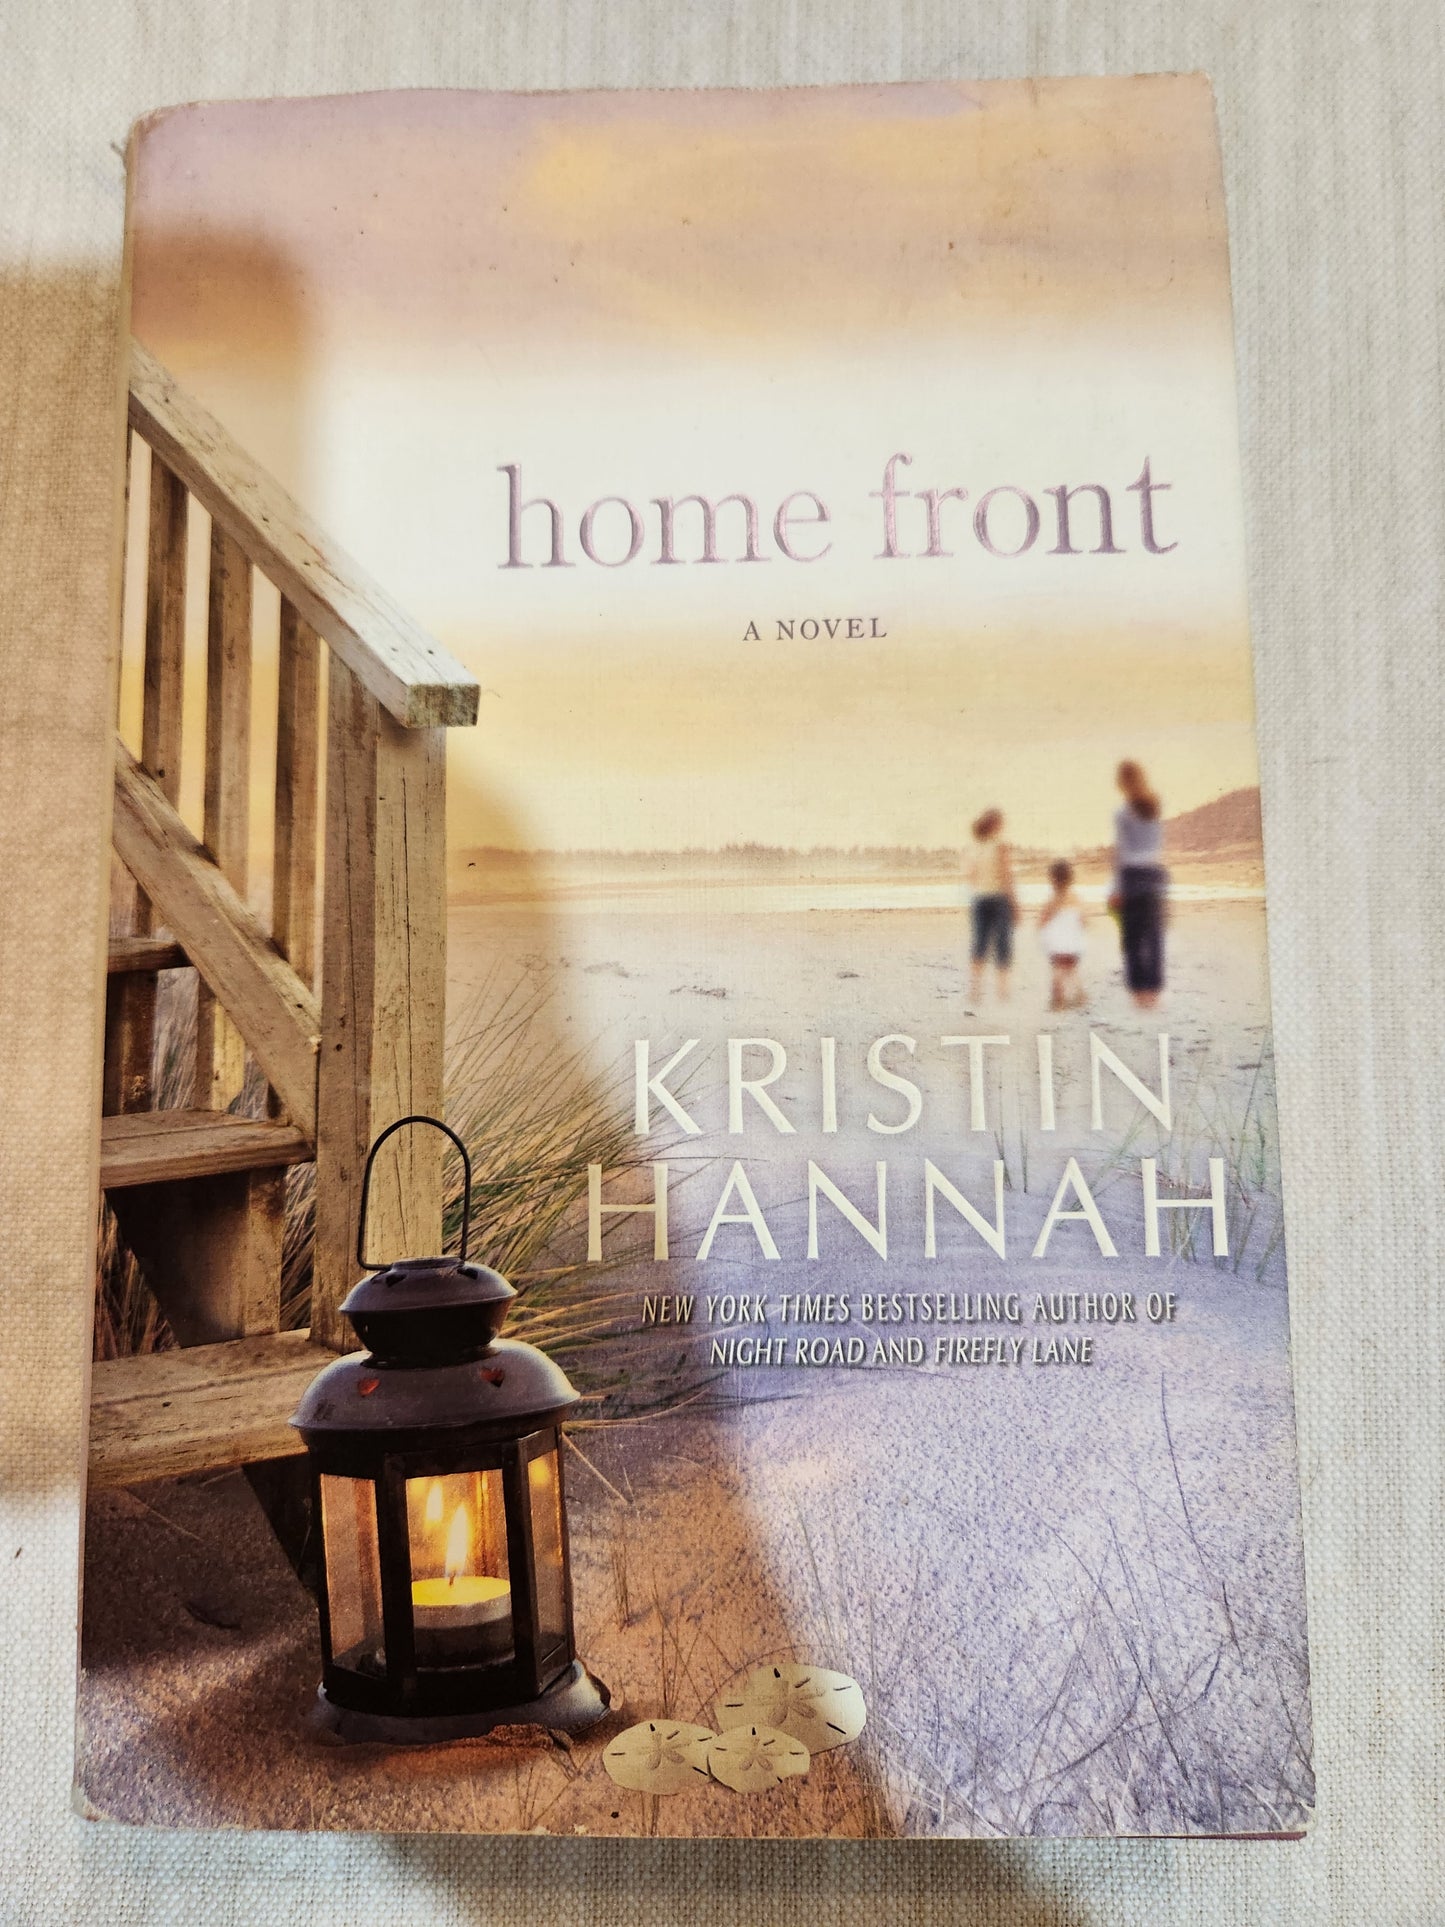 "Home Front" by Kristin Hannah (First edition, first printing)